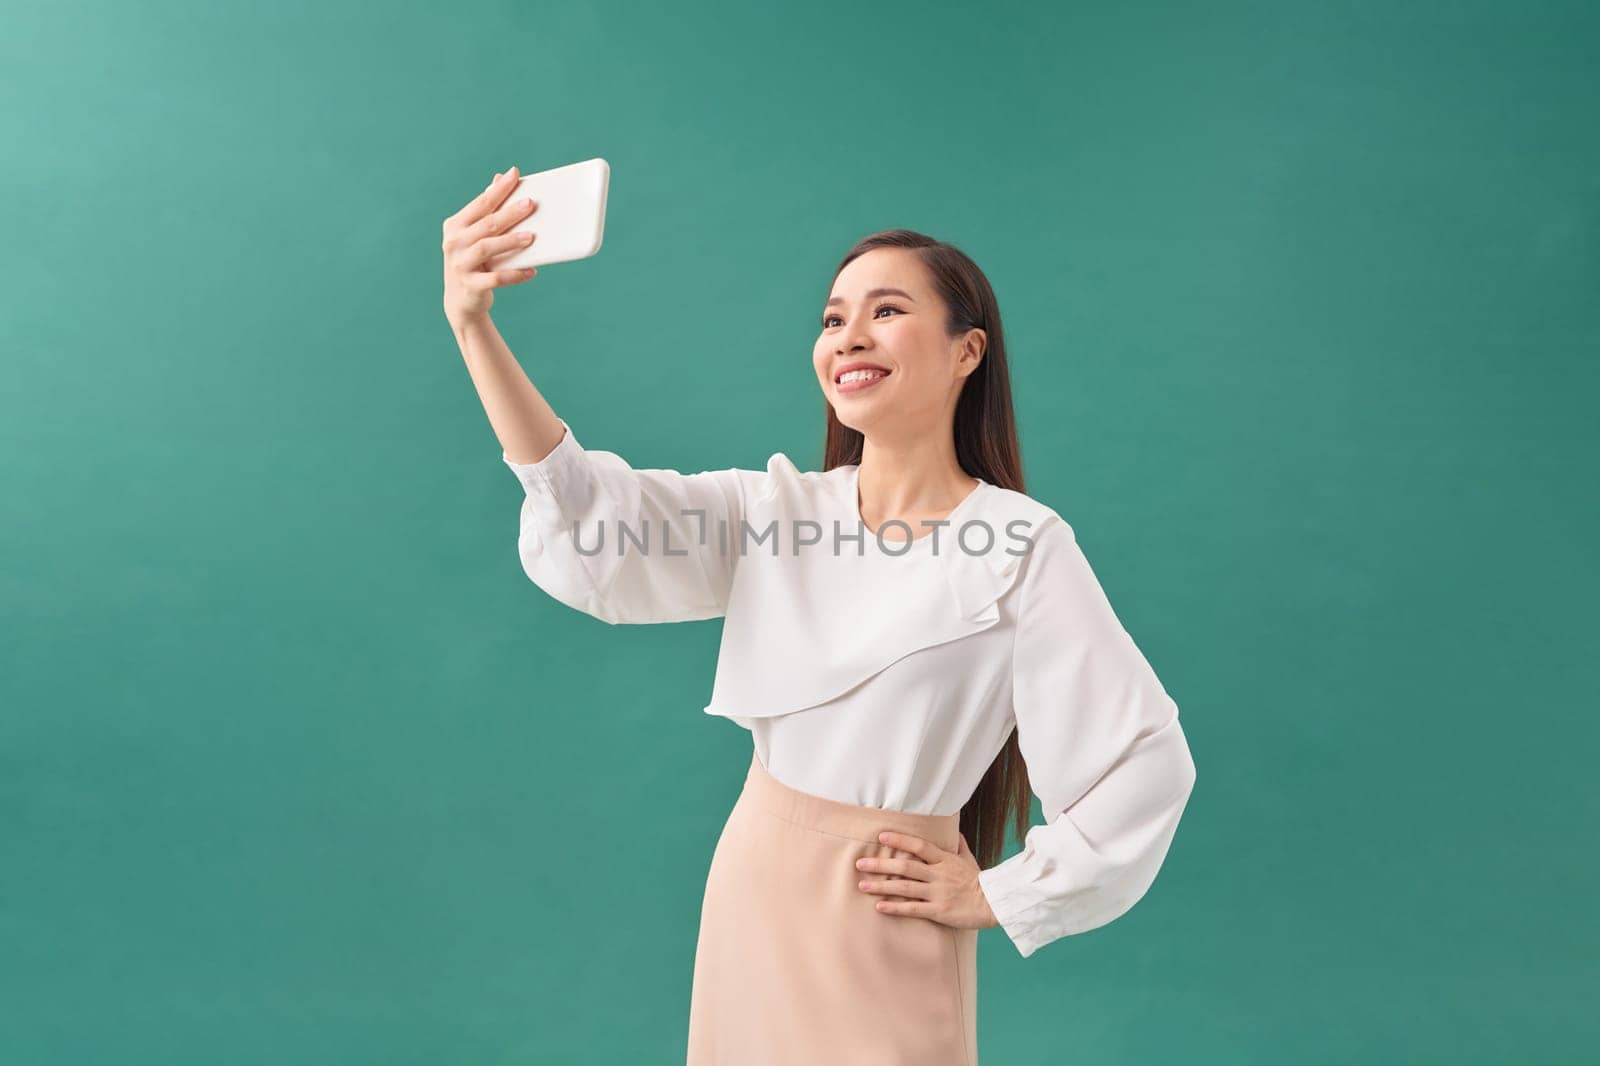 Smiling young girl making selfie photo on smartphone over green background